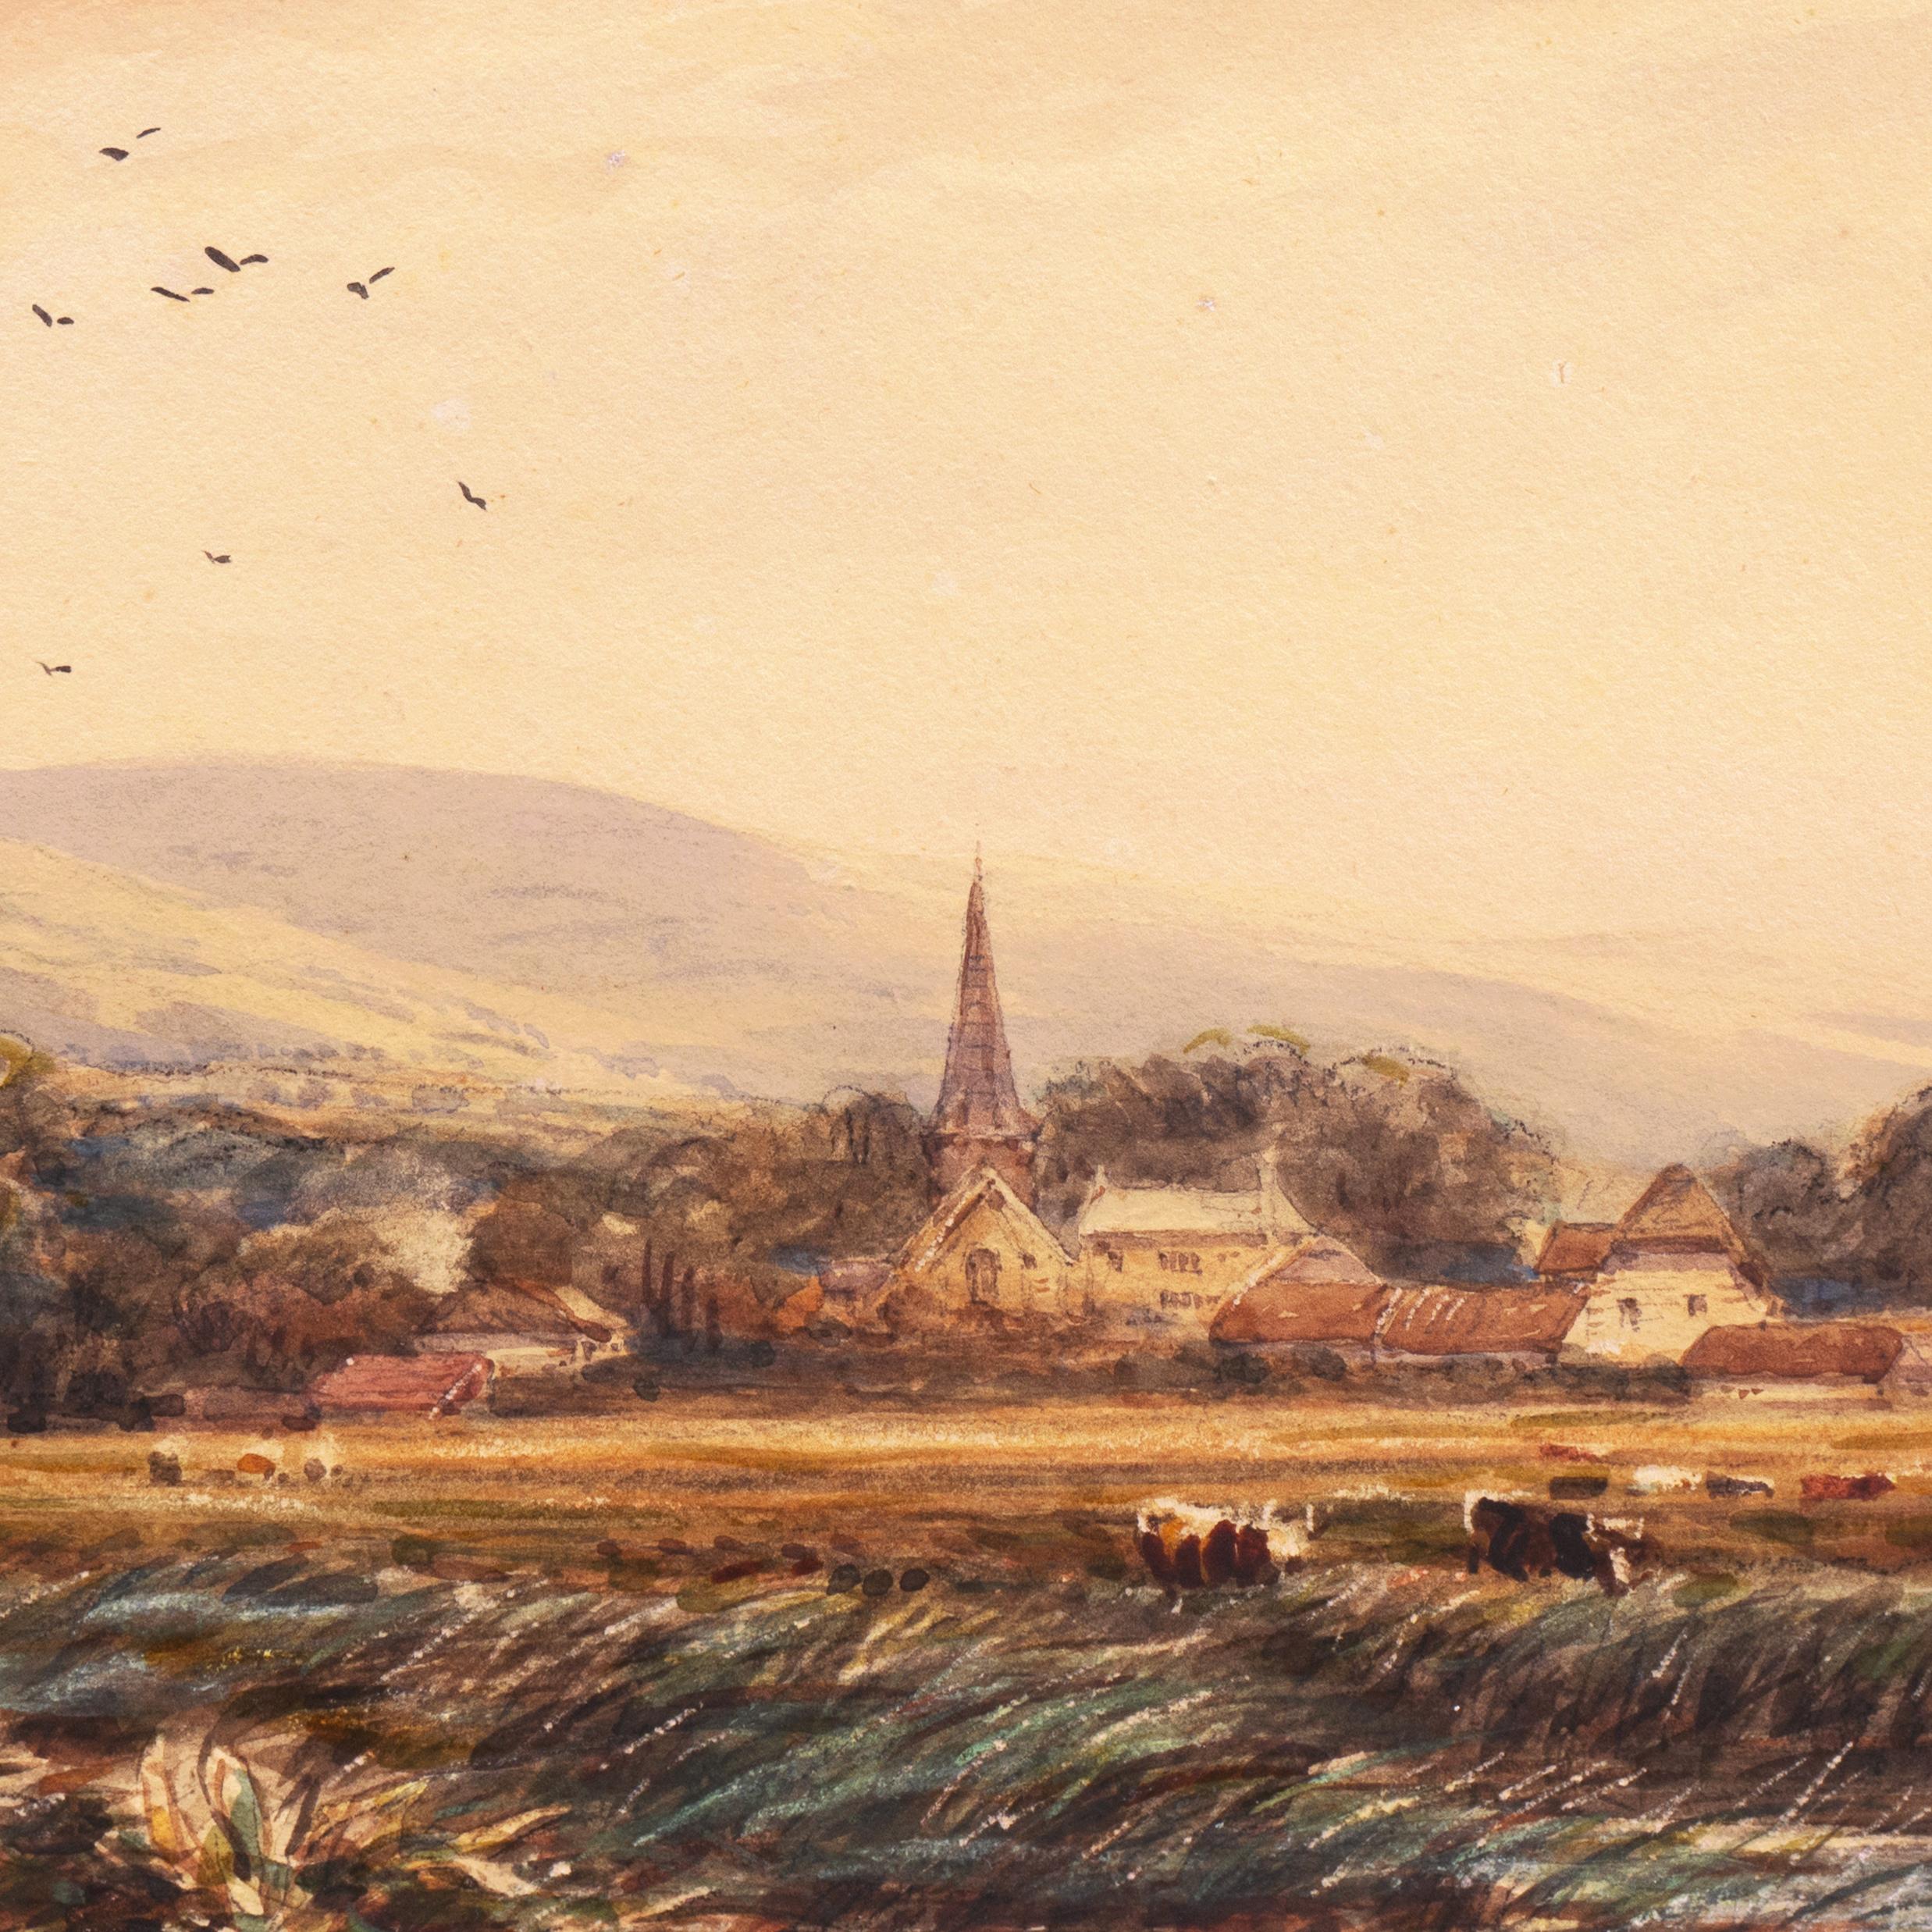 Signed lower left, 'J. Orrock' for James Orrock (British, 1829-1913) and dated 1845.
Matted Dimensions: 14.5 H x 19 W x .25 D Inches.

A well composed and freshly painted, mid-nineteenth century watercolor showing a view of a herd of cattle